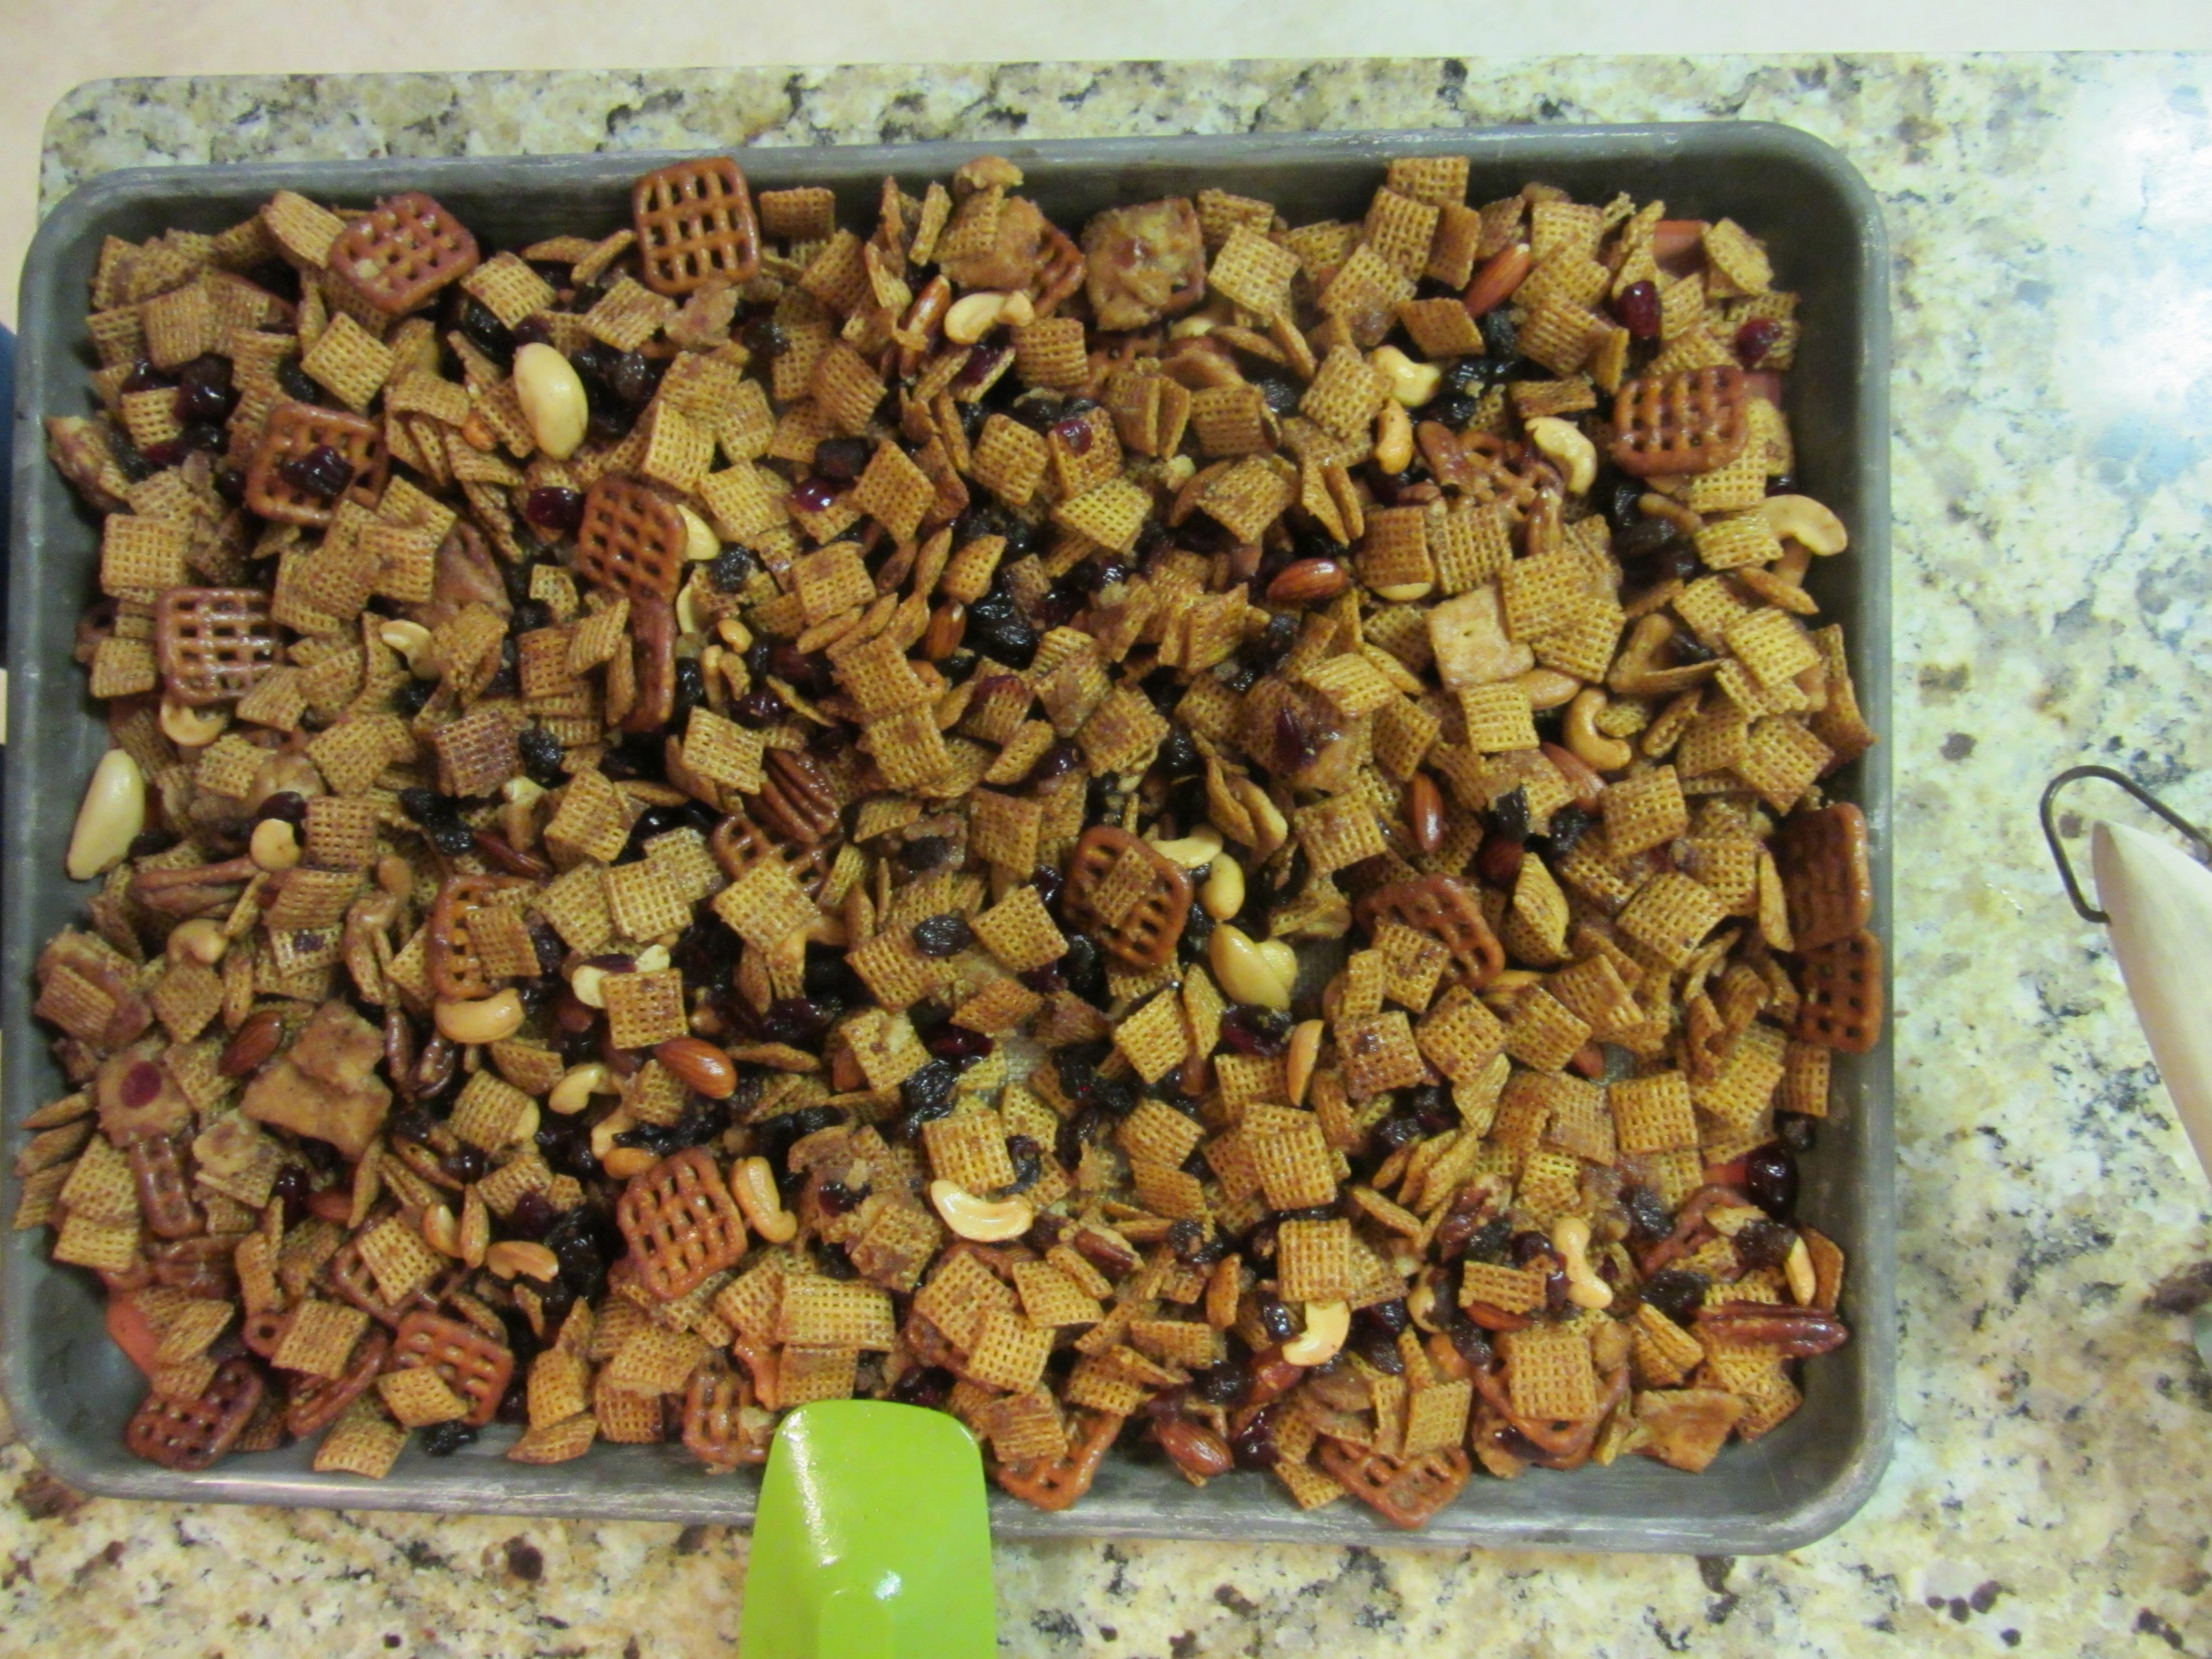 Pour the Chex Mix onto a lined baking sheet to dry out overnight (or at least 2 hours, if you can't resist). Enjoy!